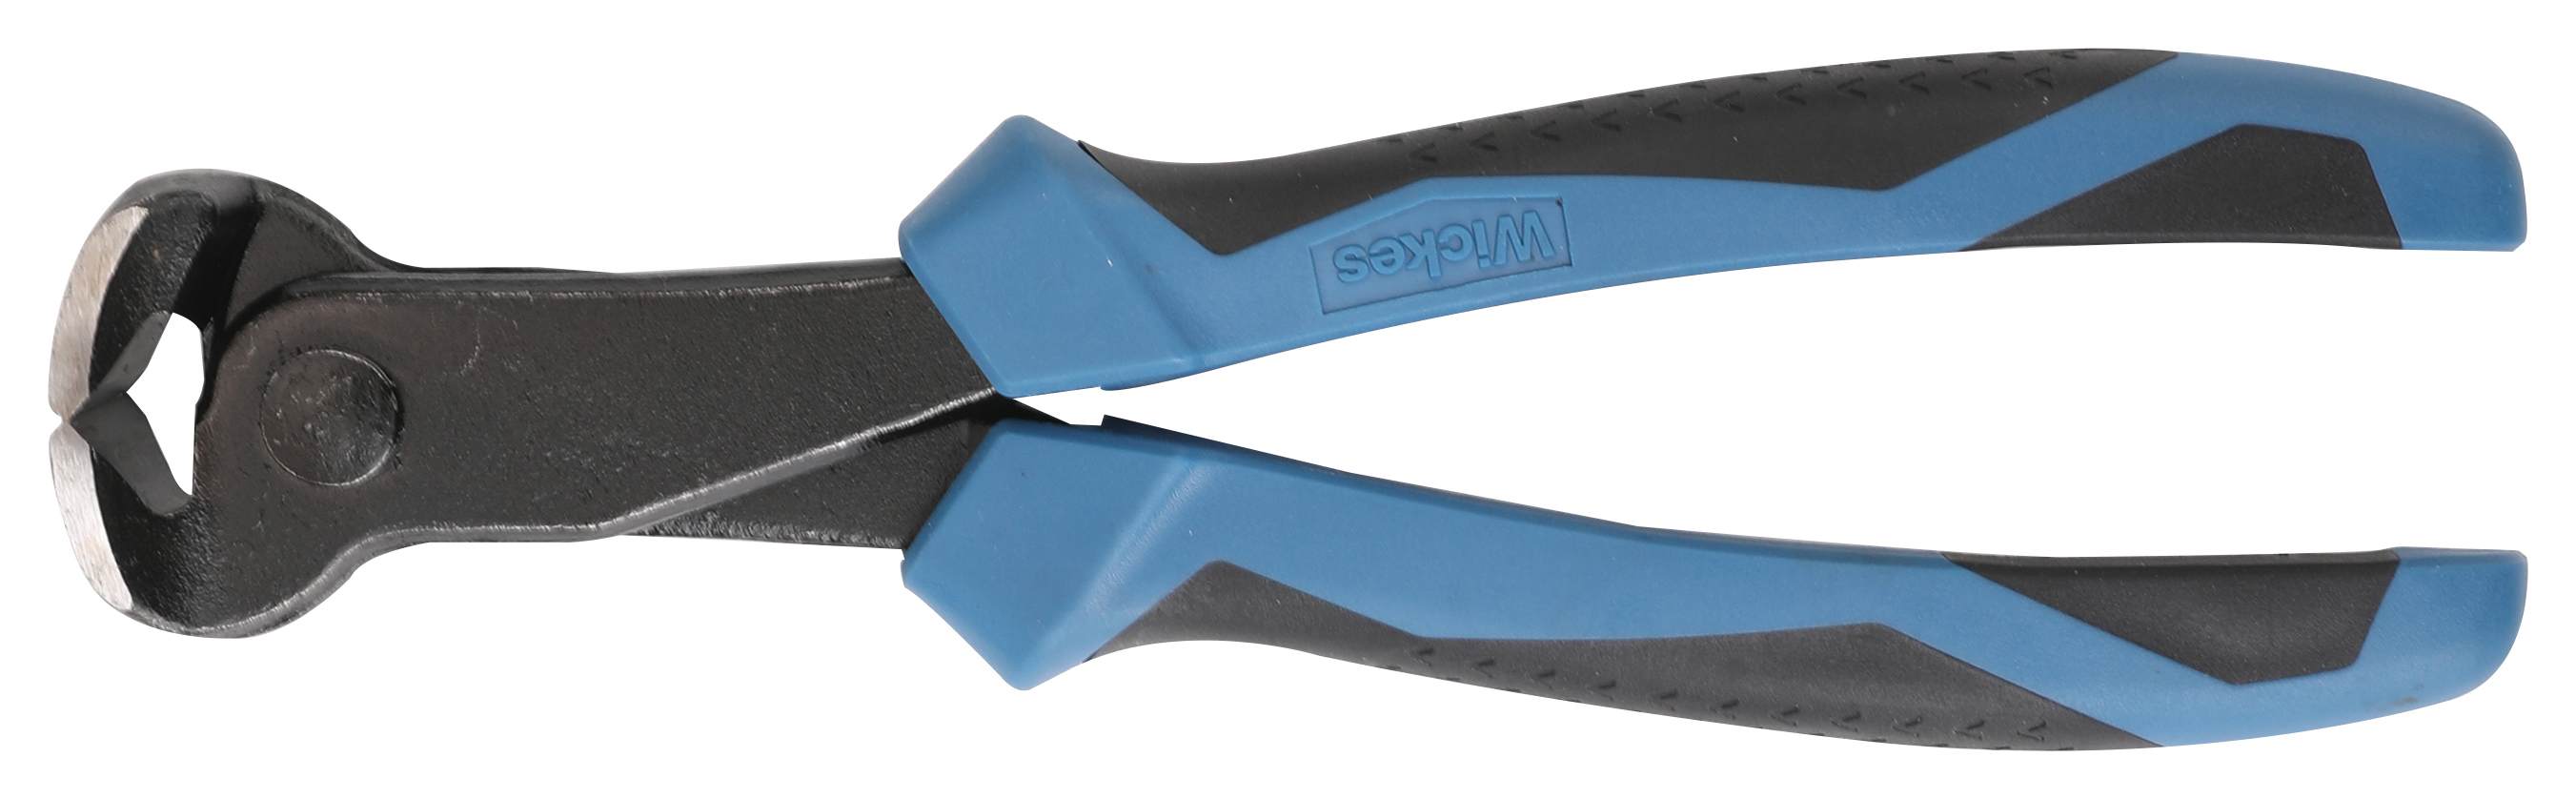 Image of Wickes End Wire Cutting Pliers - 200mm